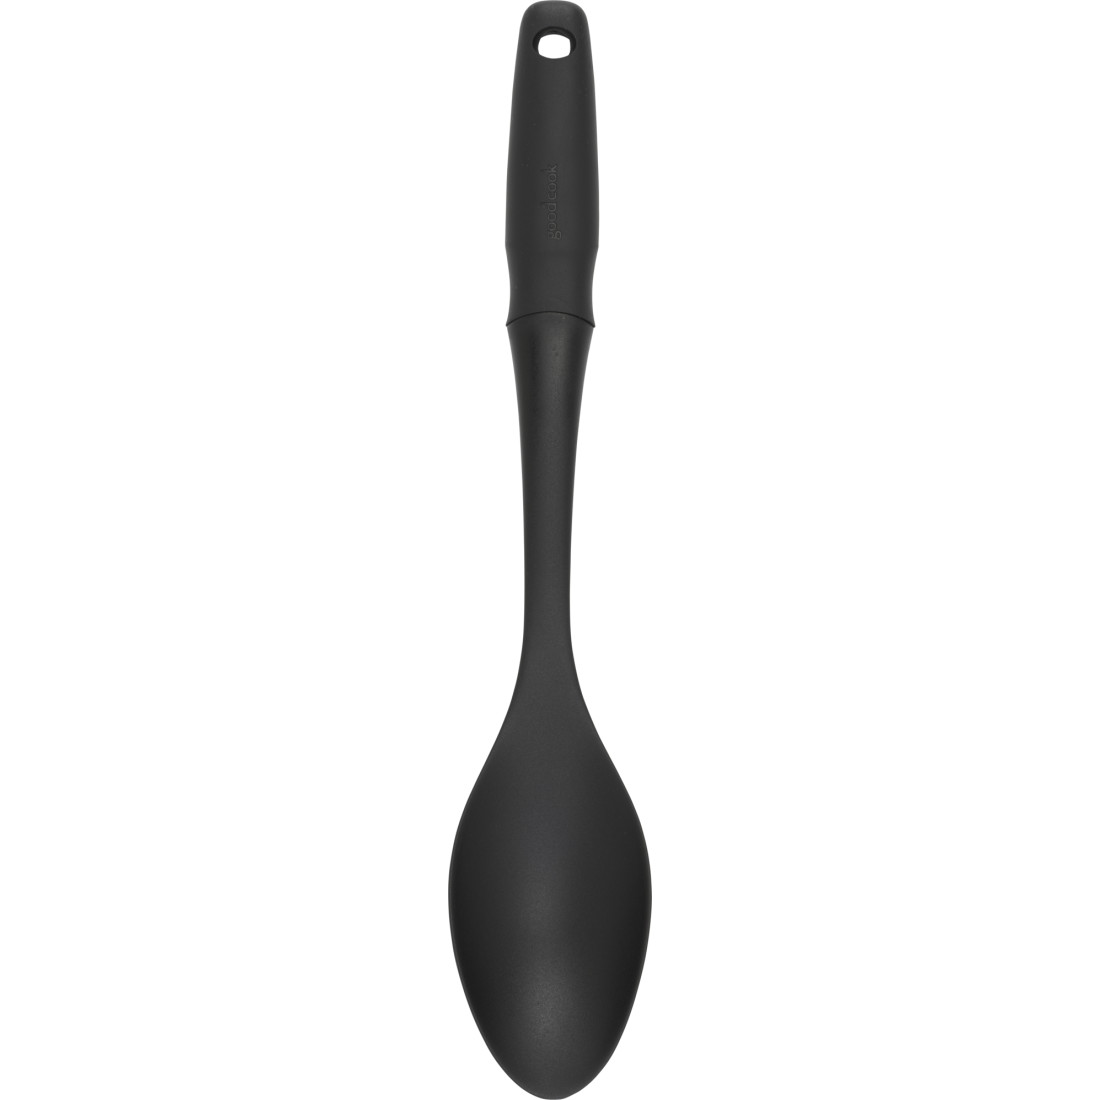 GoodCook Hi-Temp Serving and Cooking Nylon Basting Spoon